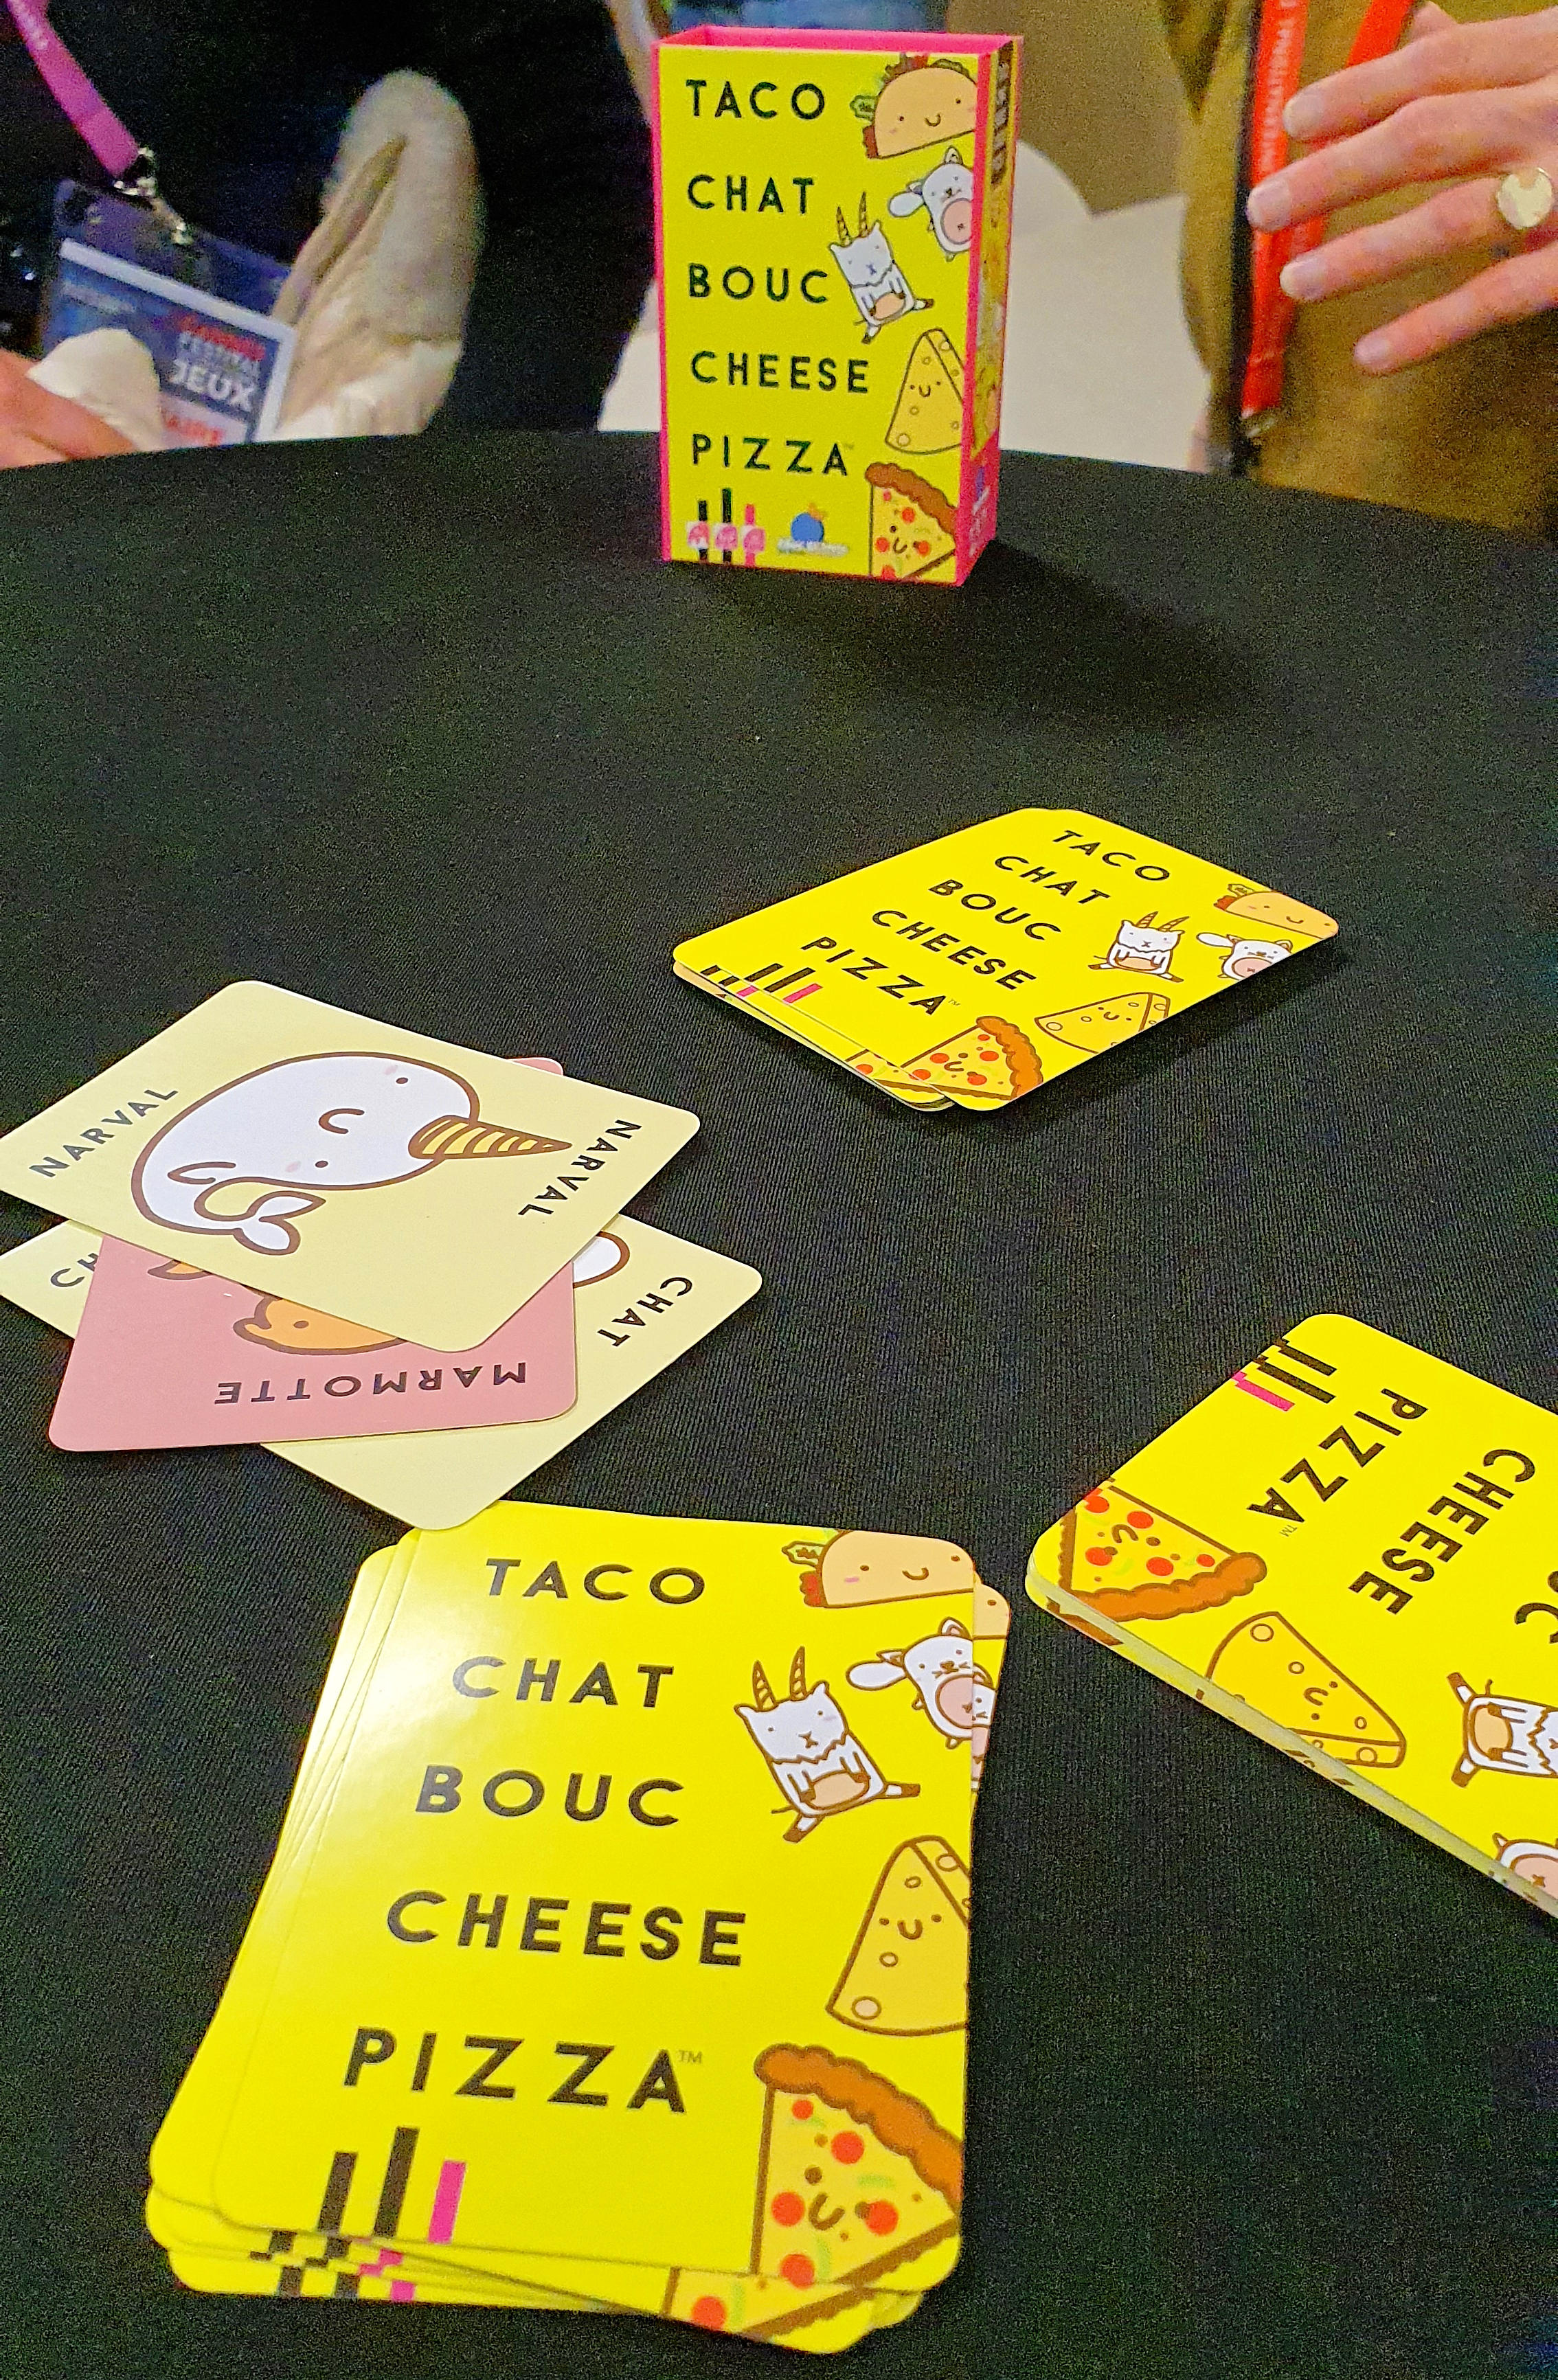 Taco Chat Bouc Cheese Pizza: les photos reportages